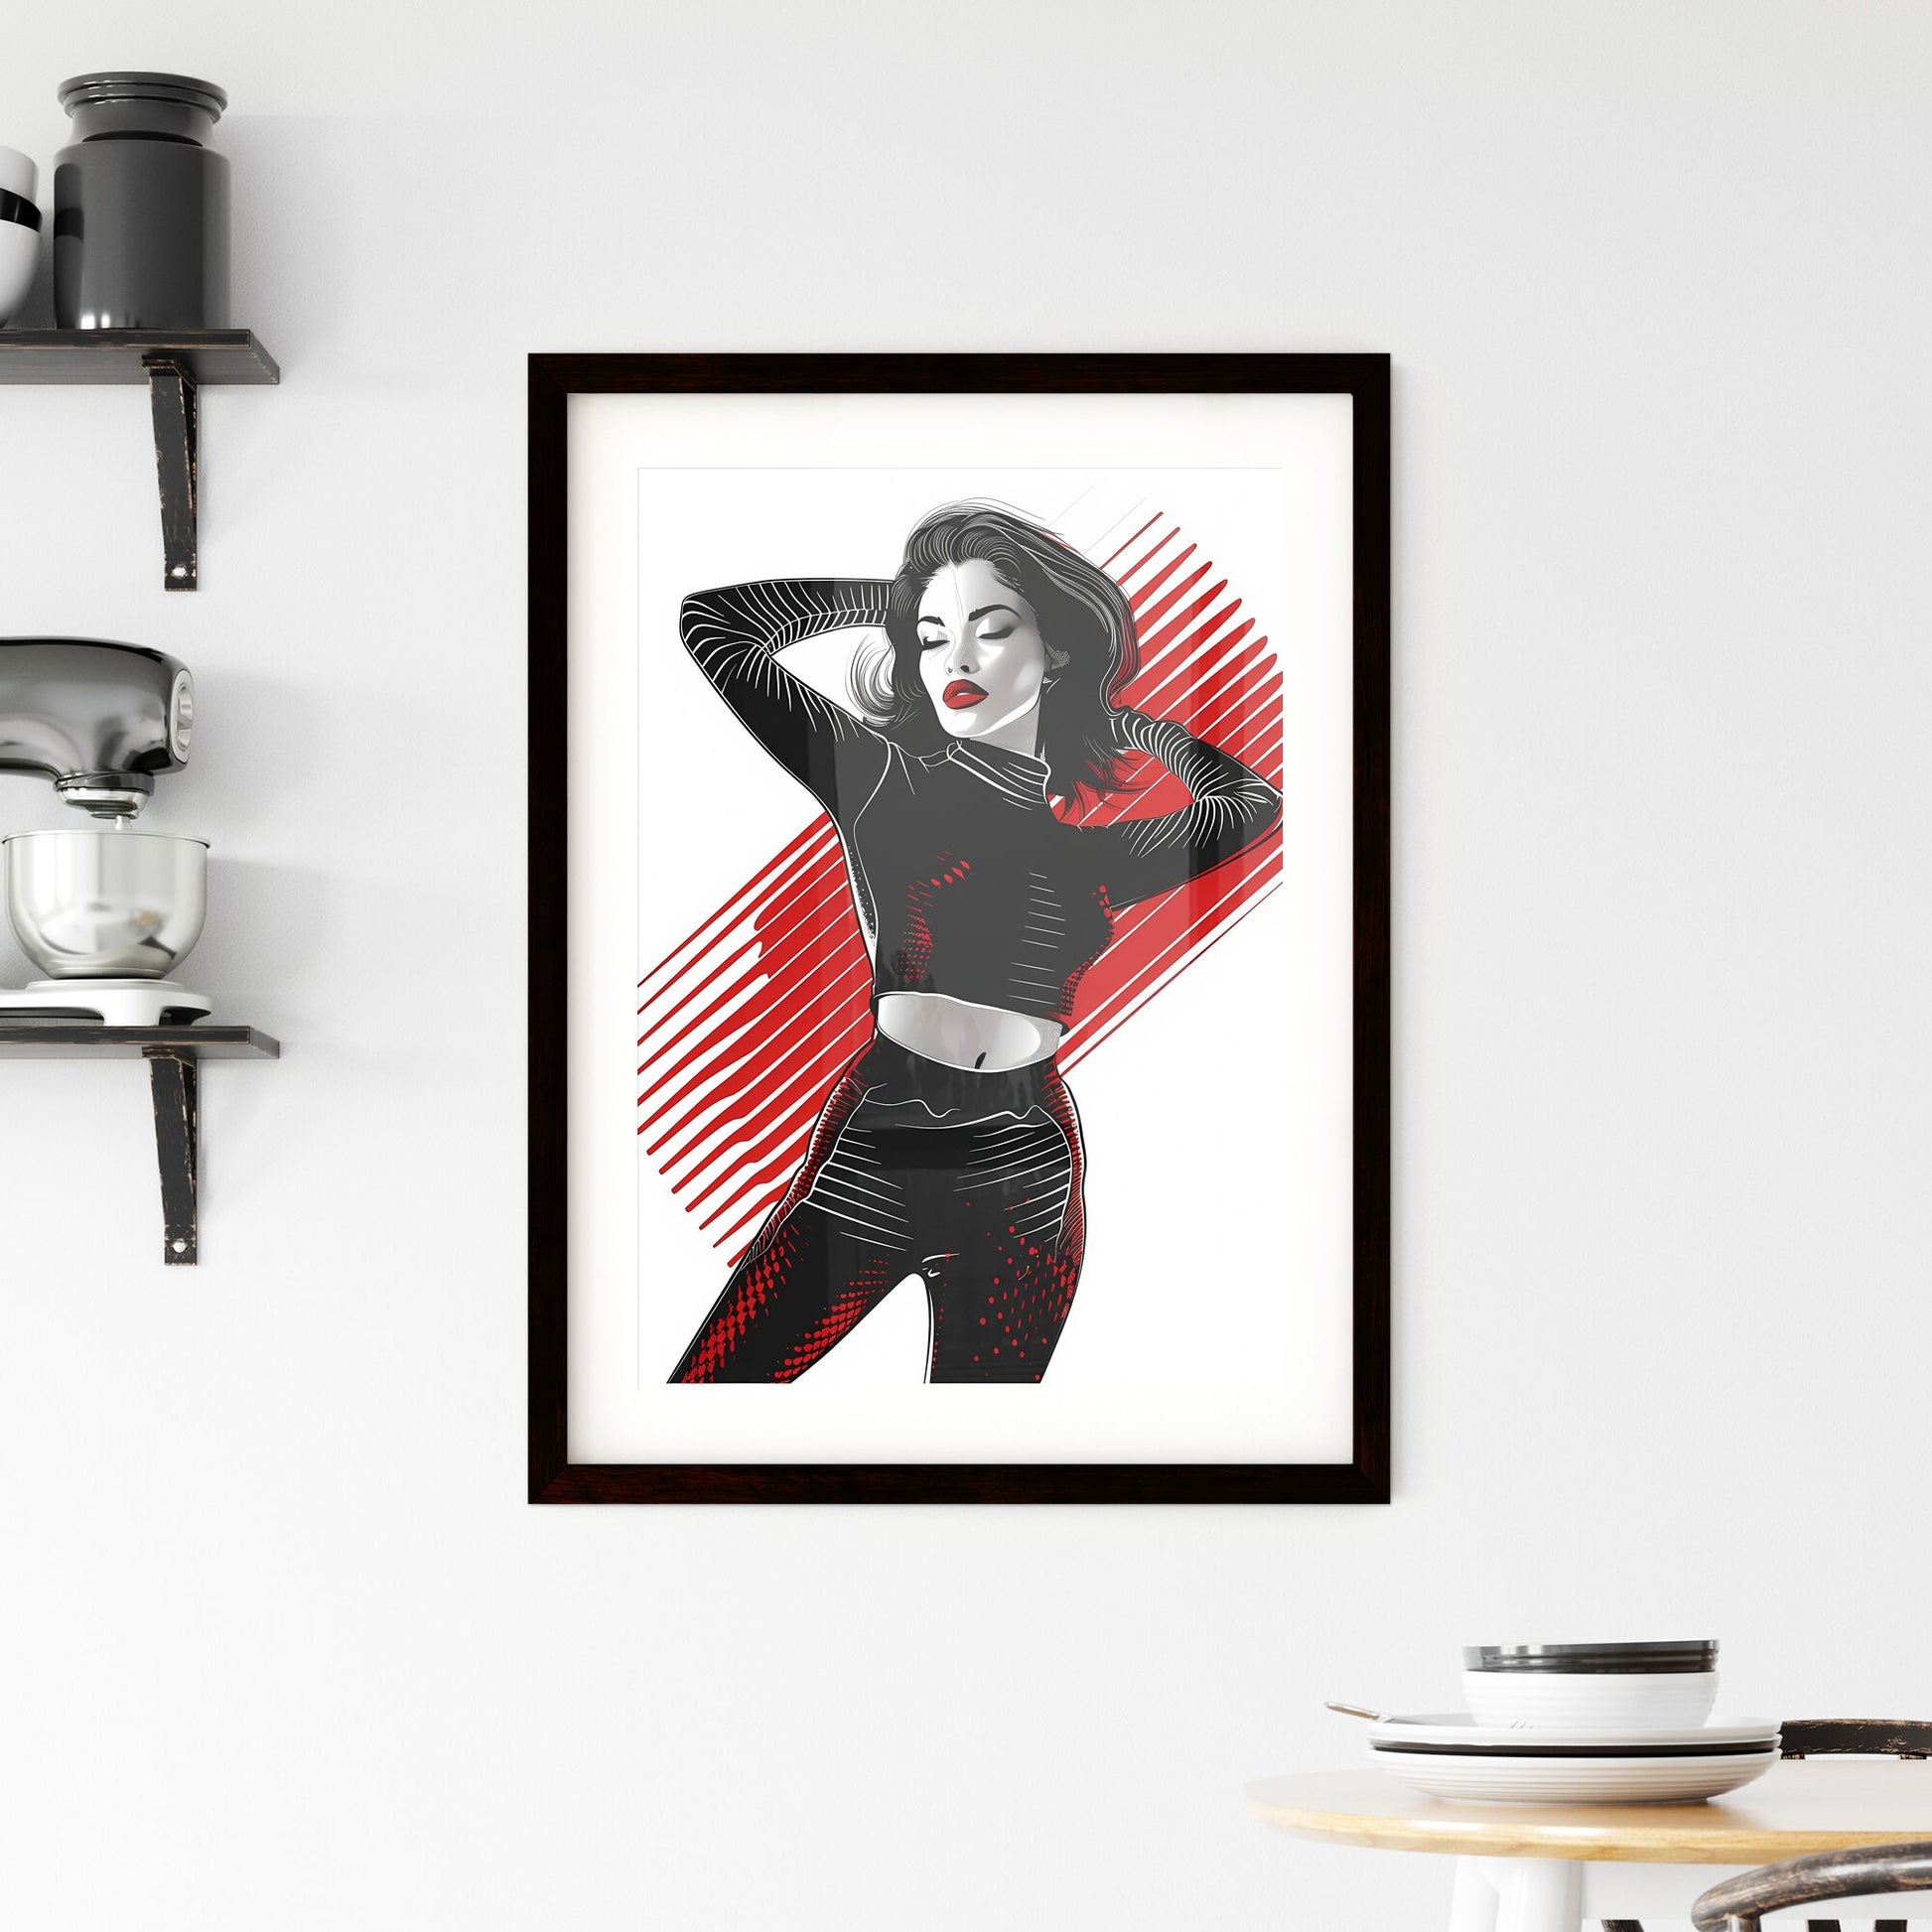 Fashion Illustration: Hyper-Detailed Woman in Striking Pose with Moire Effect Elements in Vibrant Black, White, and Red Default Title